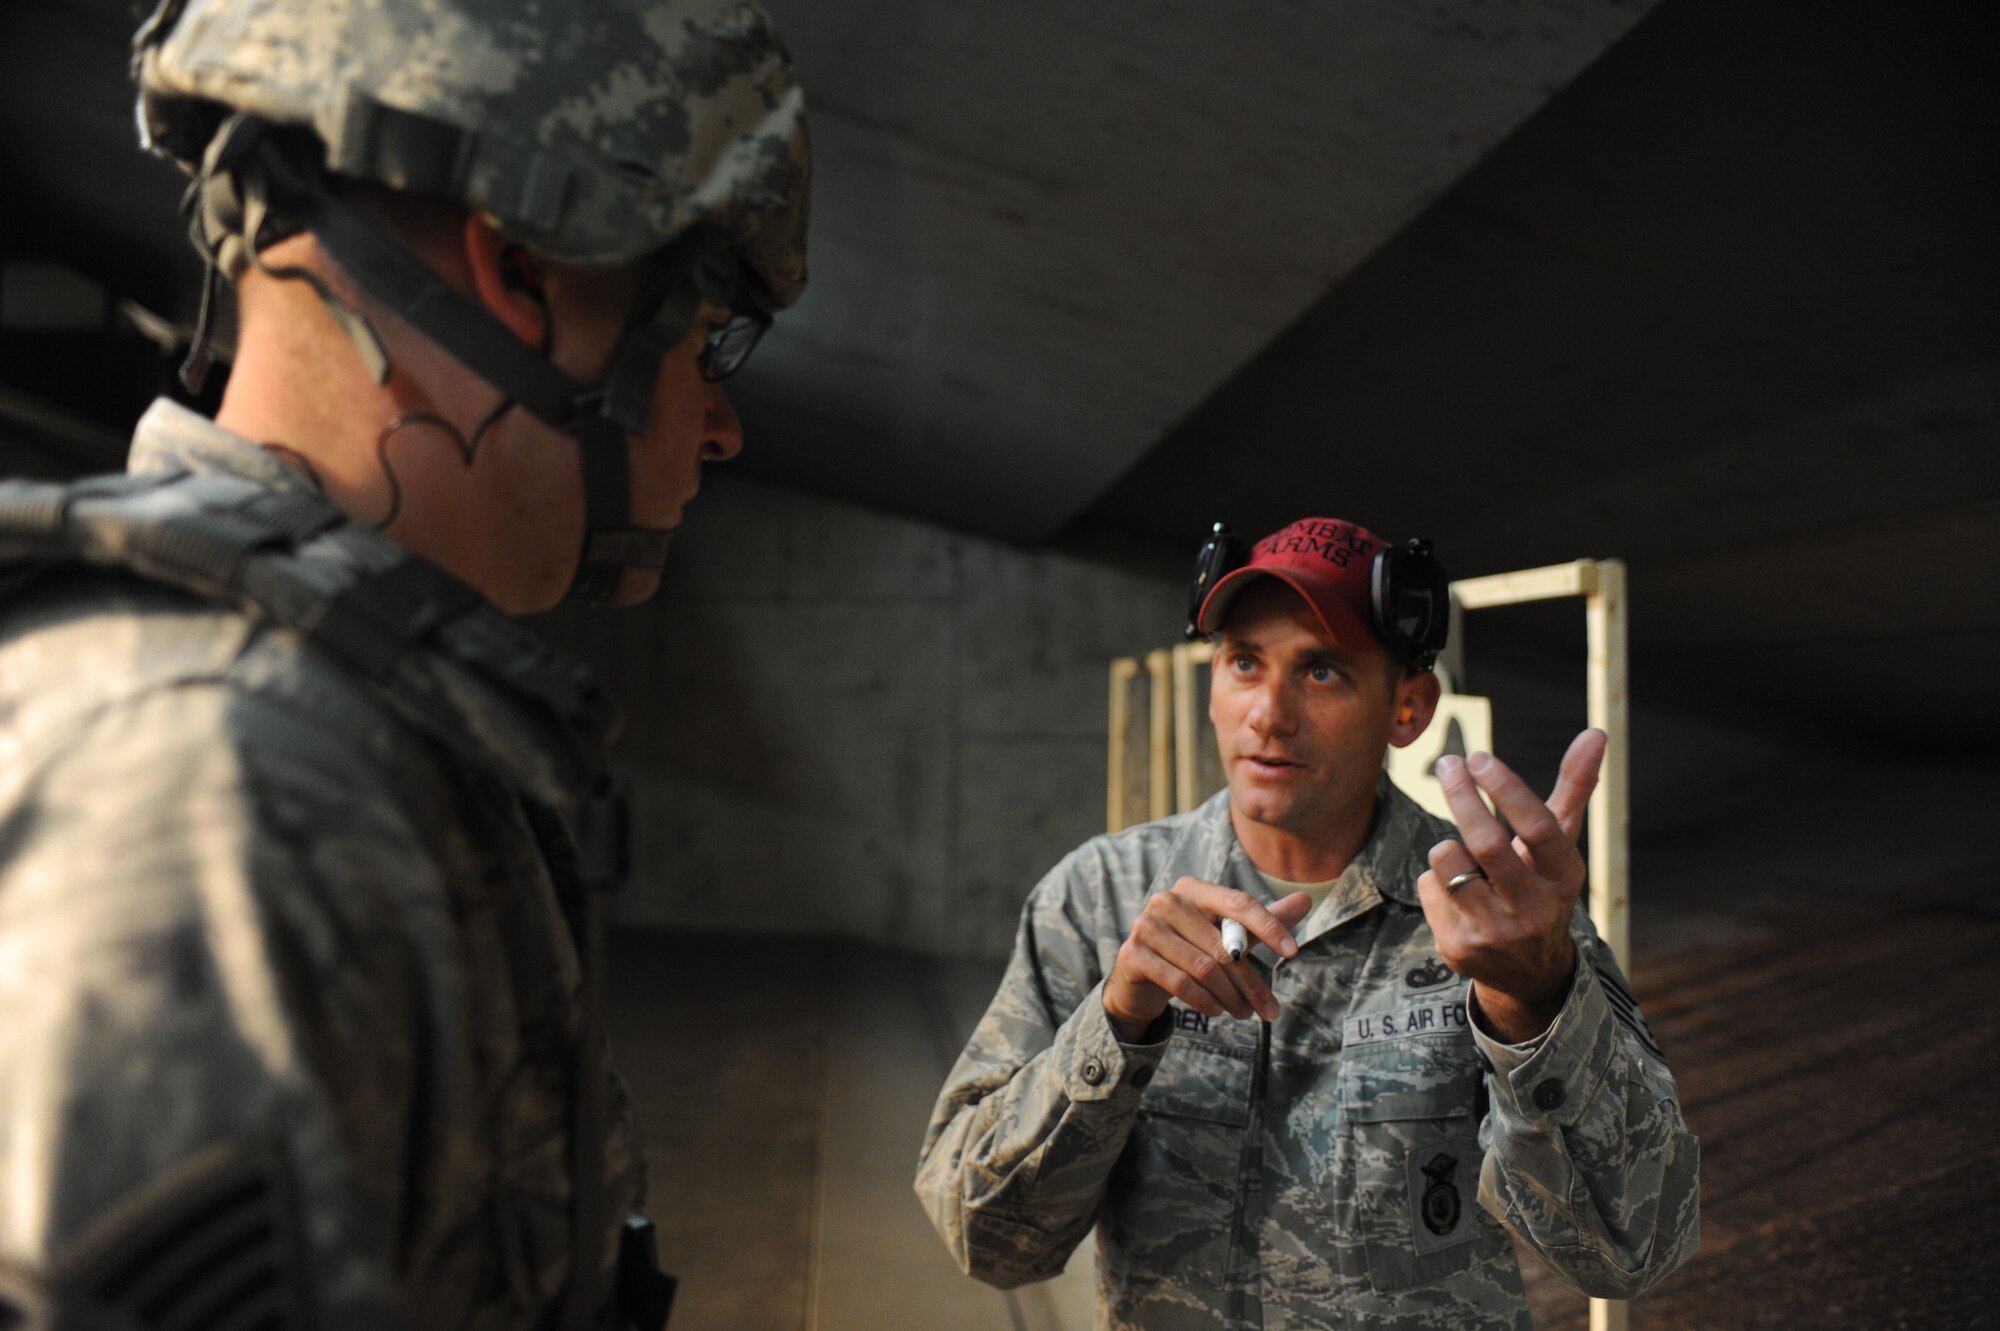 Staff Sgt. Nathan Warren, 28th Security Forces Squadron combat arms instructor, reviews proper firing techniques with Master Sgt. Peter Holtz, 28th SFS flight chief, at Ellsworth Air Force Base, S.D., Oct. 13, 2015. Prior to practical application on the range, students learn about firing stances, troubleshooting malfunctions and weapon maintenance. (U.S. Air Force photo by Airman Sadie Colbert/Released)